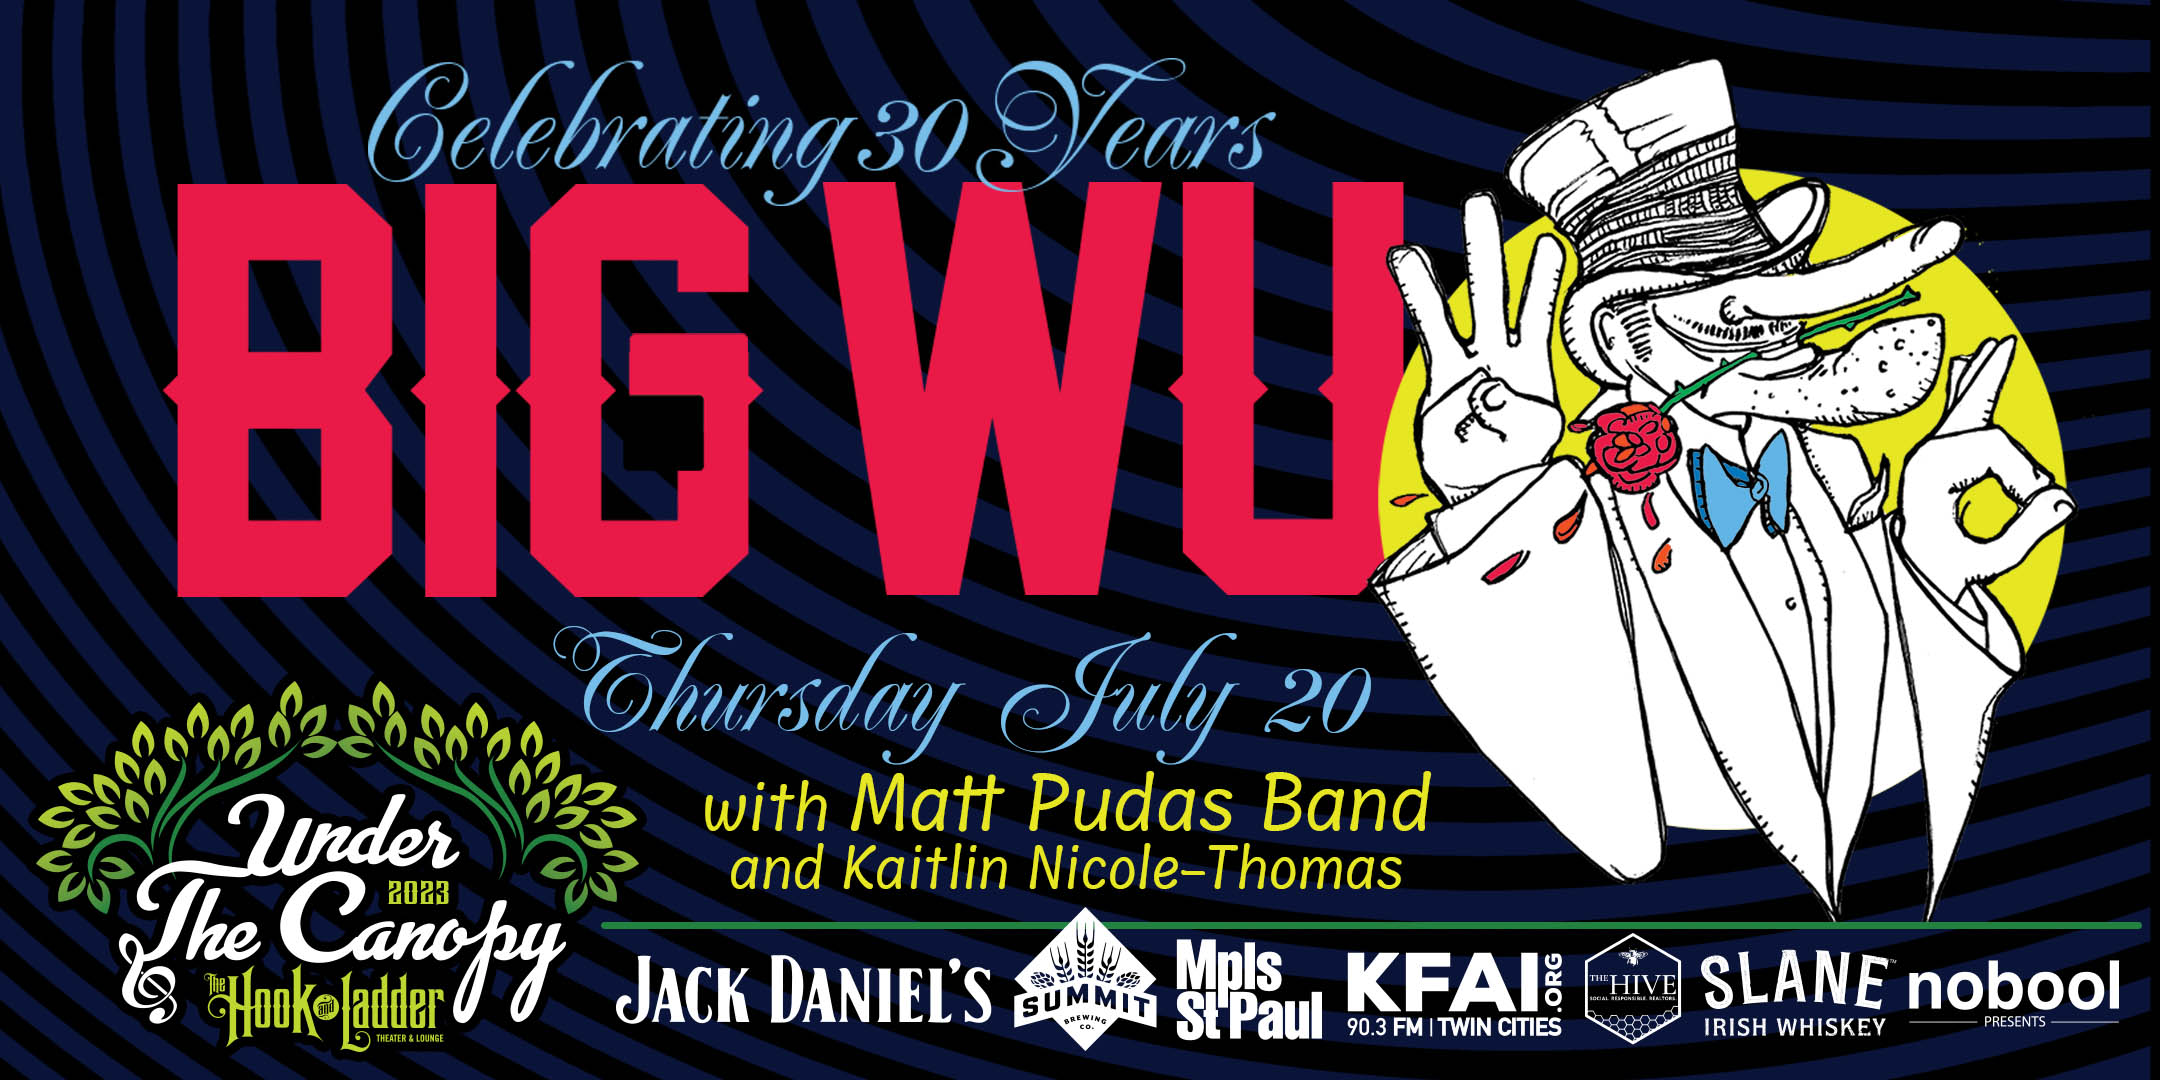 The Big Wu with Matt Pudas Band (Late Night) and guest Kaitlin Nicole-Thomas (Support) Thursday, July 20 Under The Canopy at The Hook and Ladder Theater "An Urban Outdoor Summer Concert Series" Doors 6:00pm :: Music 7:00pm :: 21+ Reserved Seats: $40 GA: $20 ADV / $26 DOS